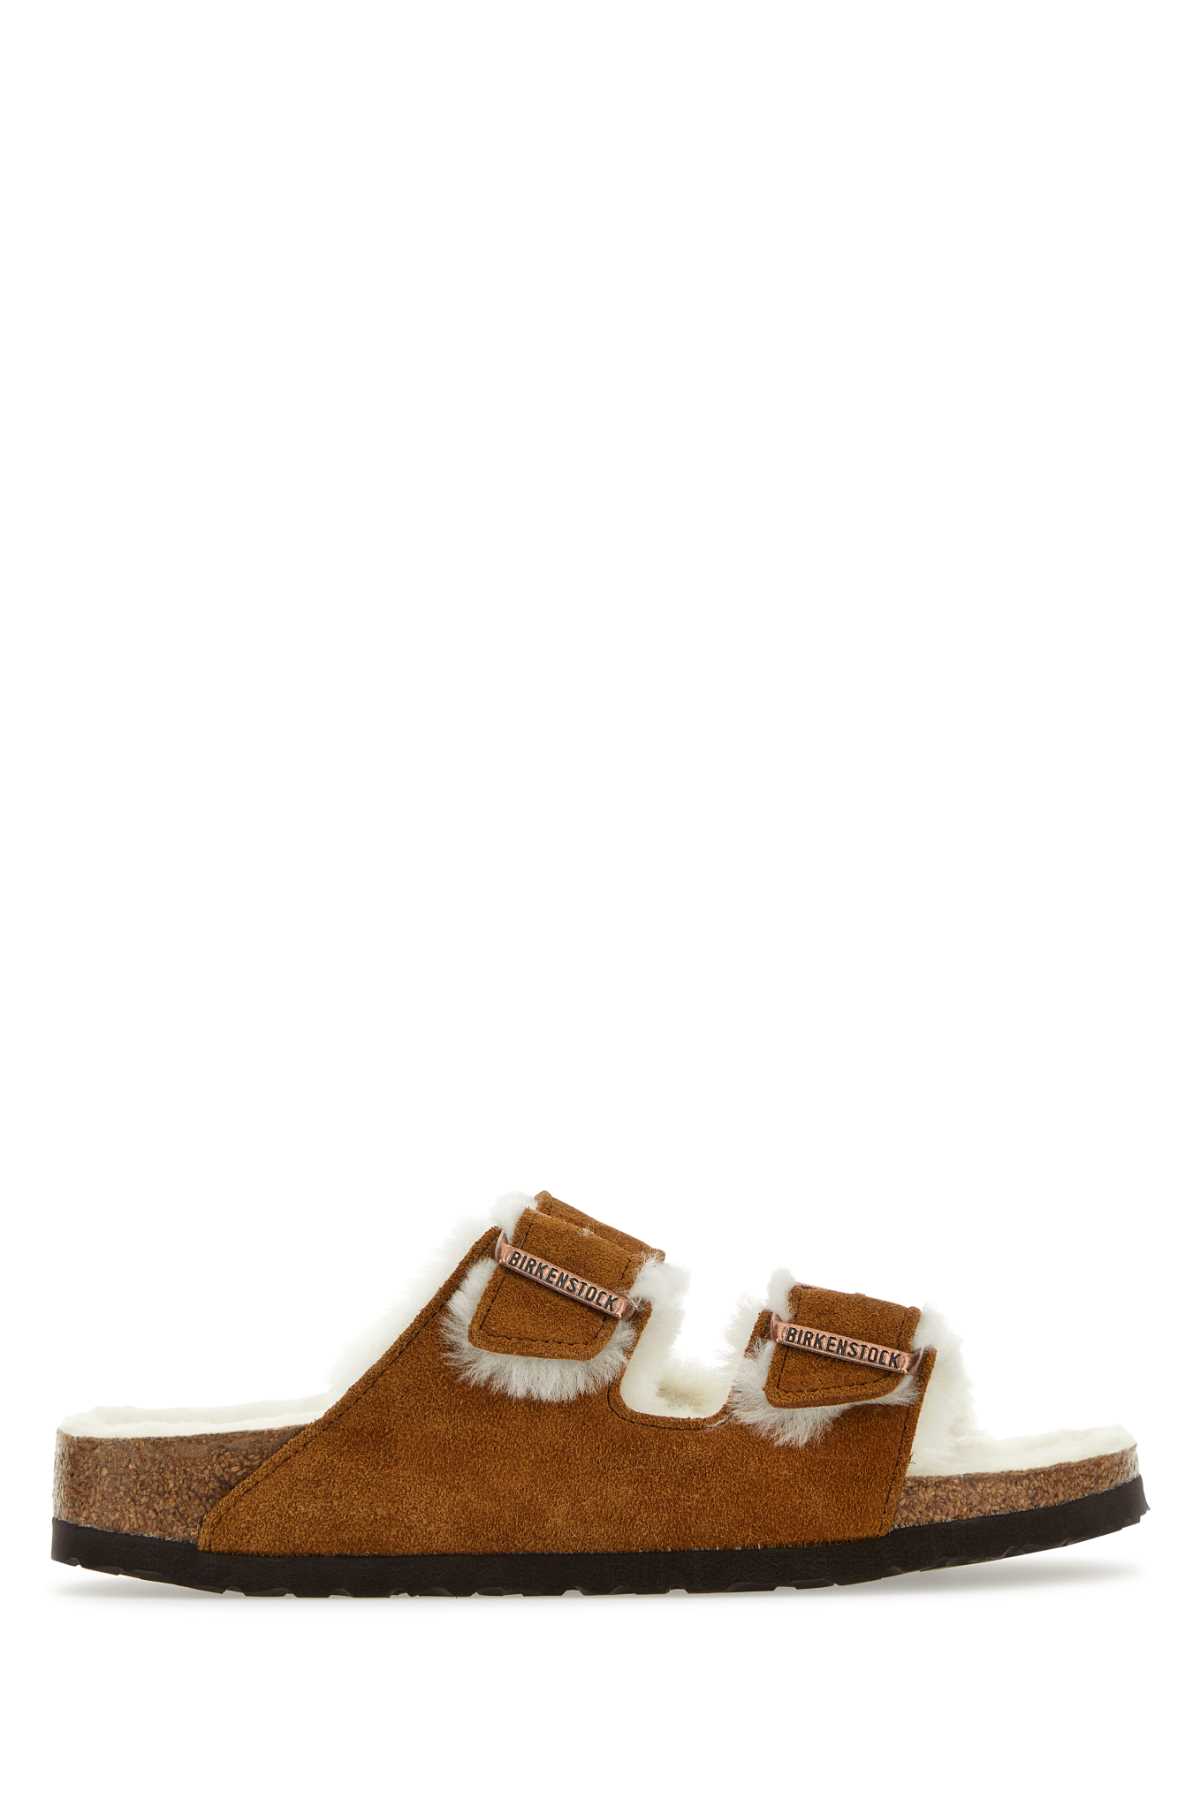 Biscuit Suede Arizona Shearling Slippers